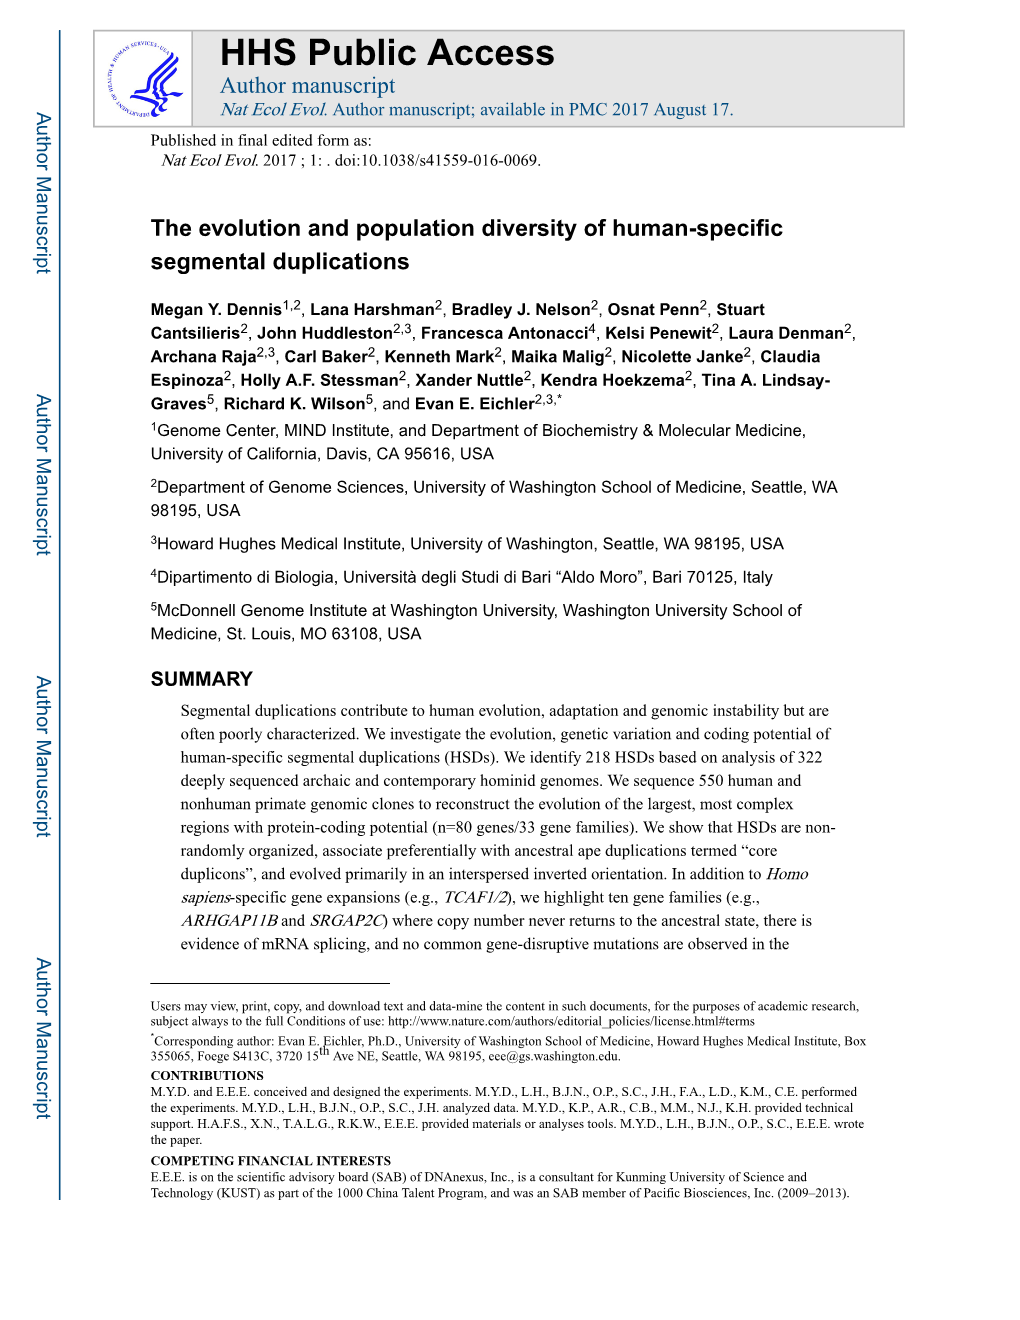 The Evolution and Population Diversity of Human-Specific Segmental Duplications